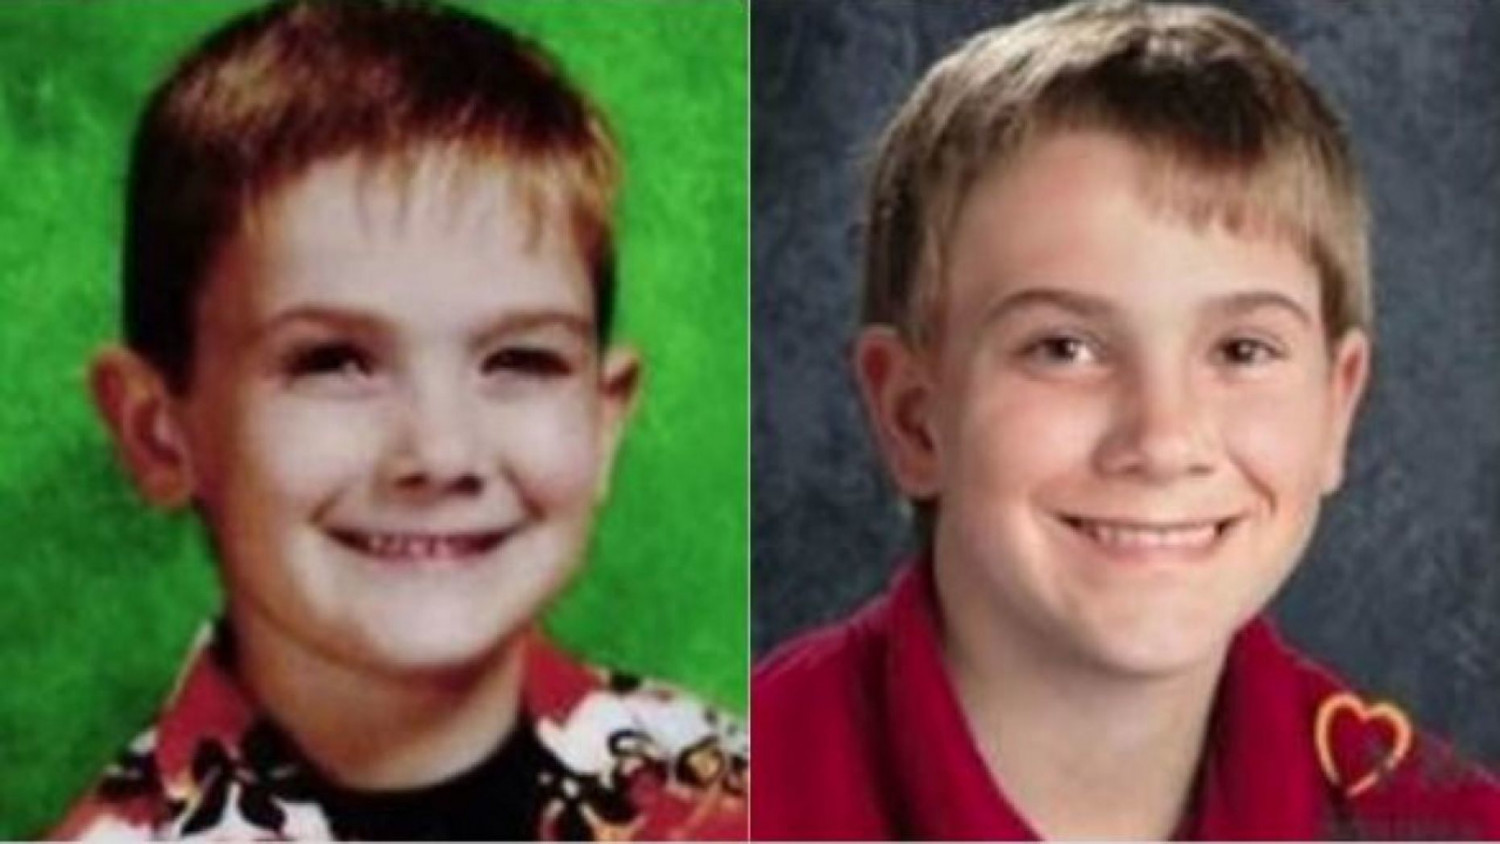 Family of Missing Boy Was Elated, Then Devastated by Hoax